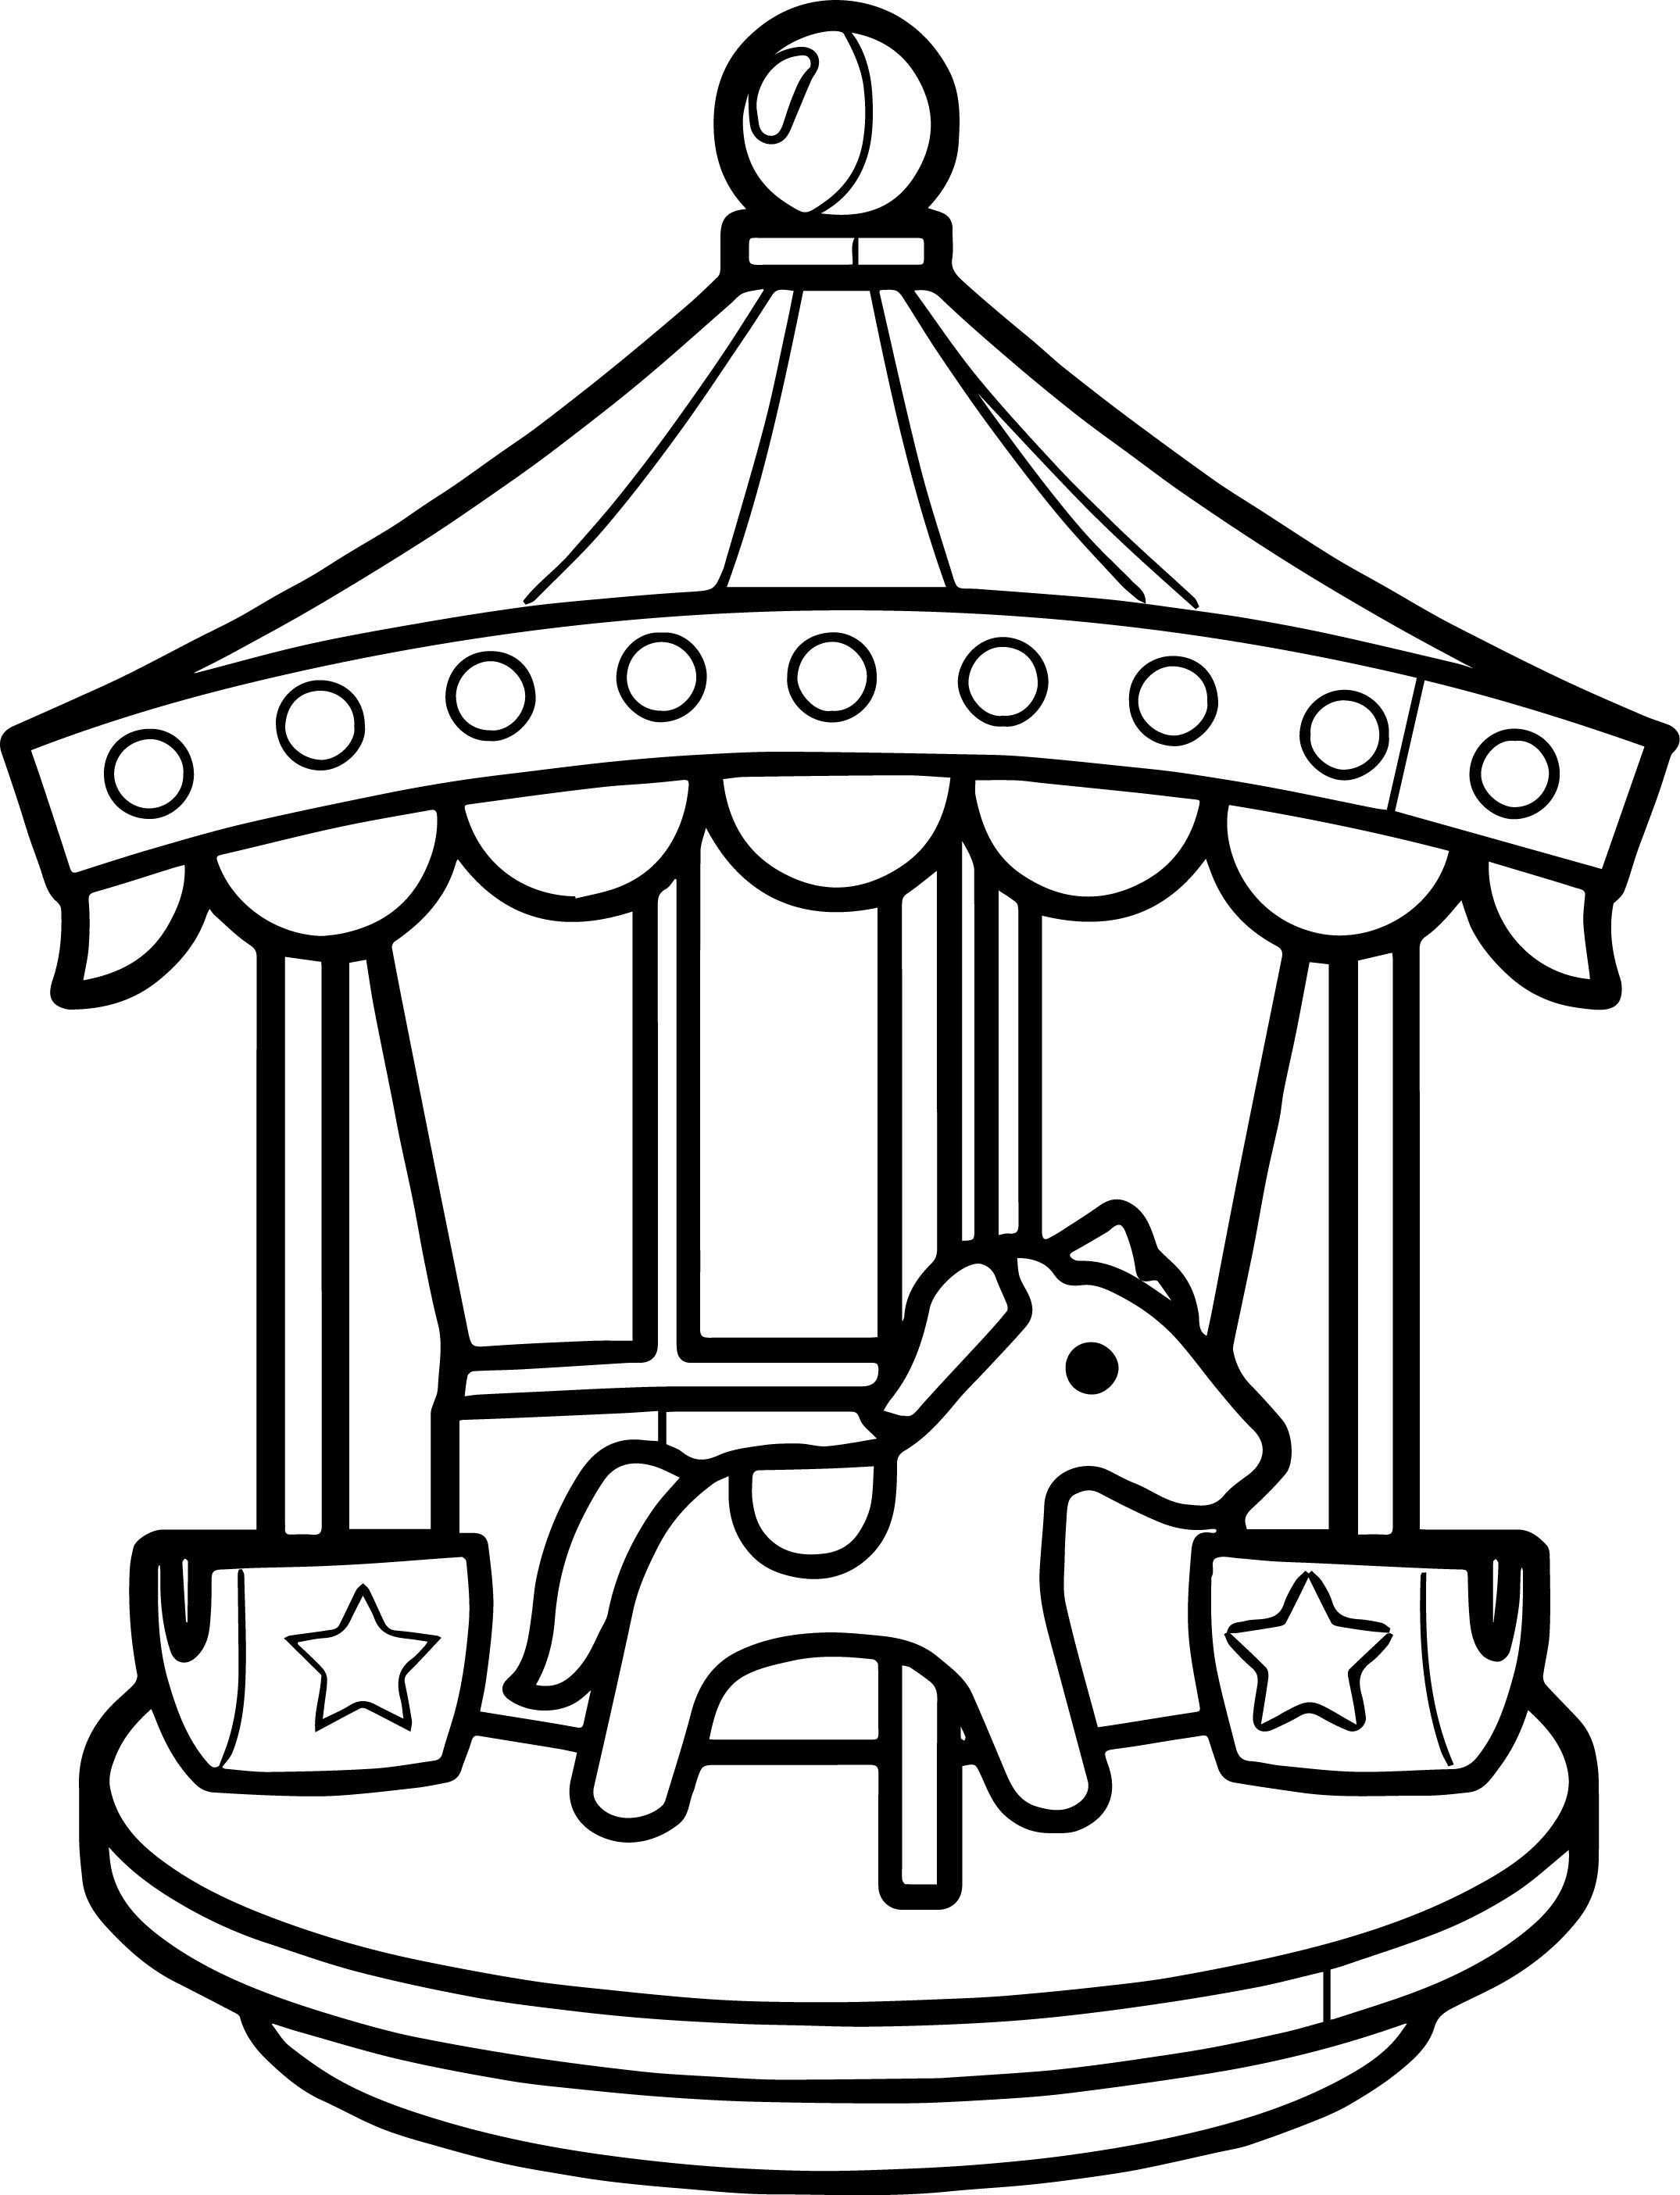 Http Wecoloringpage Com Wp Content Uploads 2017 01 Carousel Coloring Page Jpg Colorin